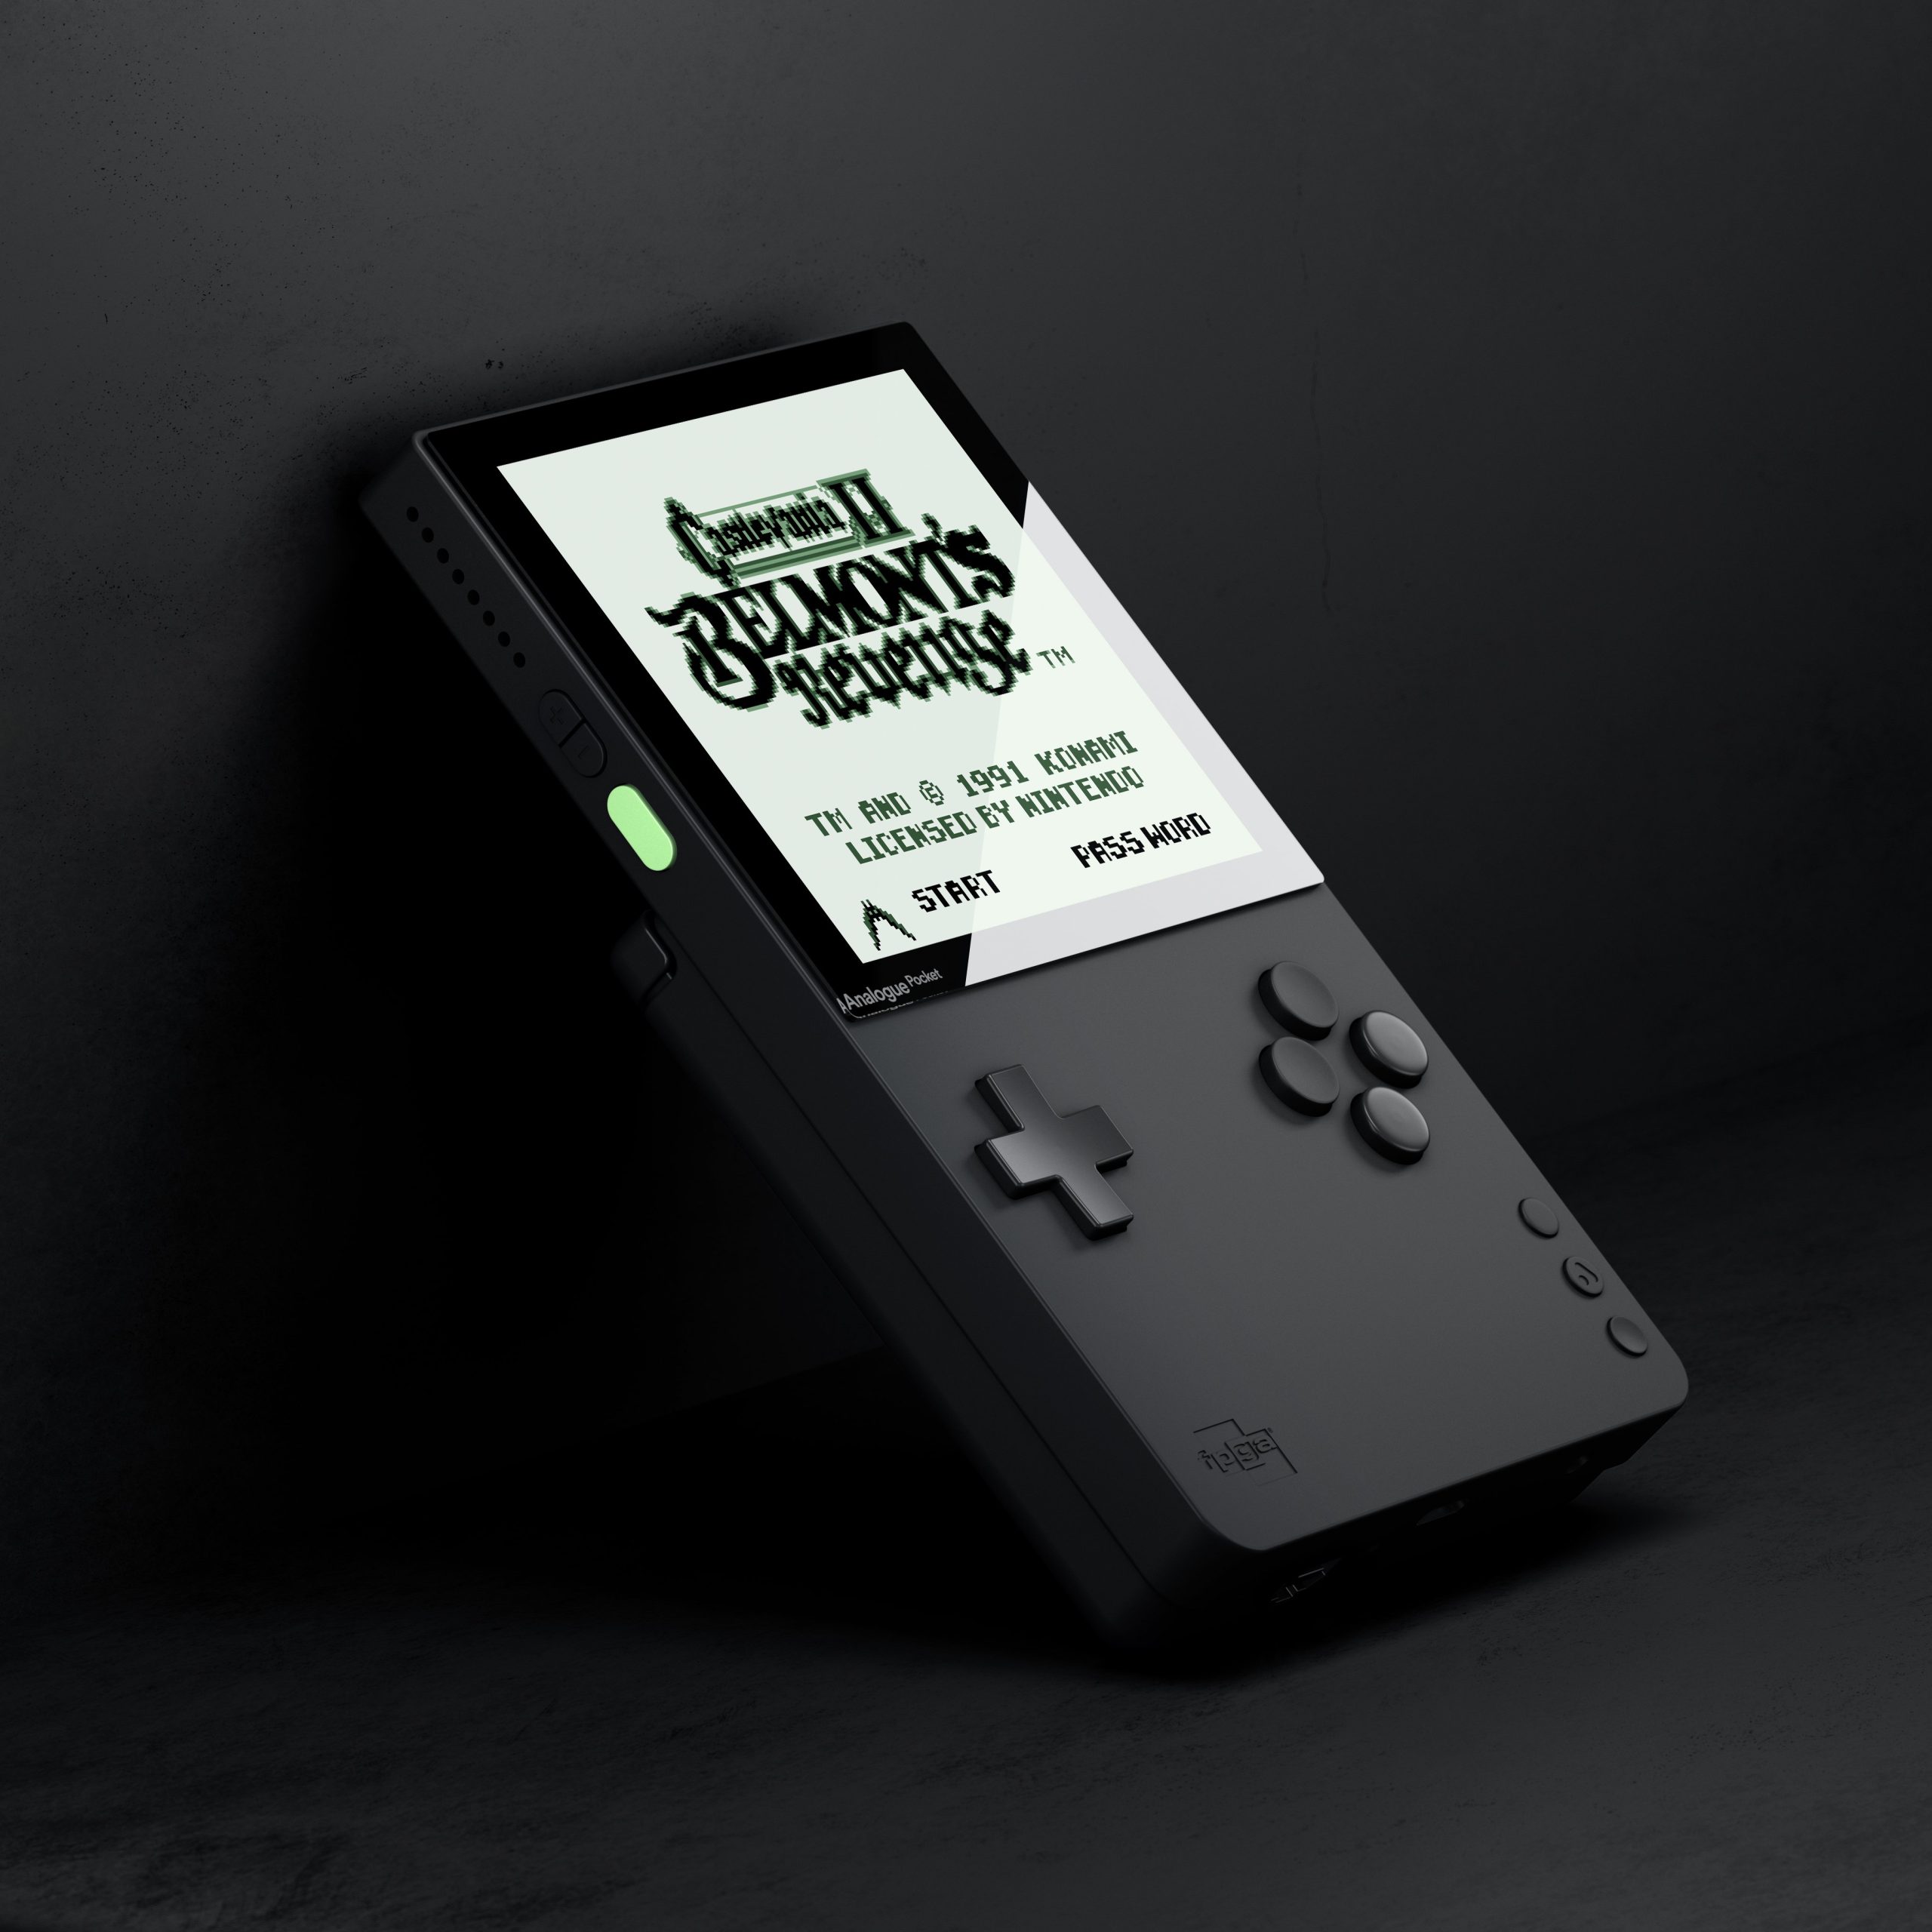 The Analogue Pocket is the Gameboy clone we deserve